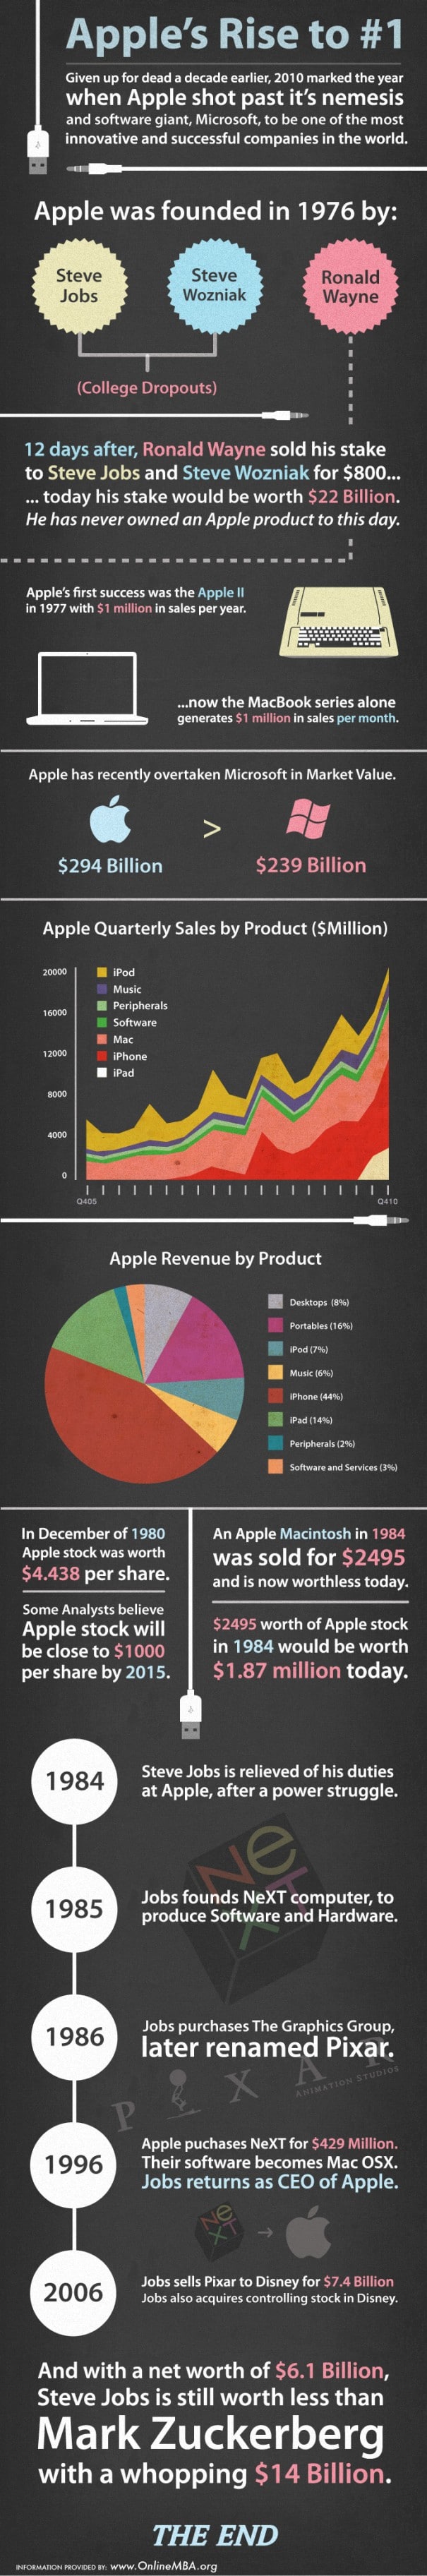 Apple’s Rise To Number 1 [Infographic]